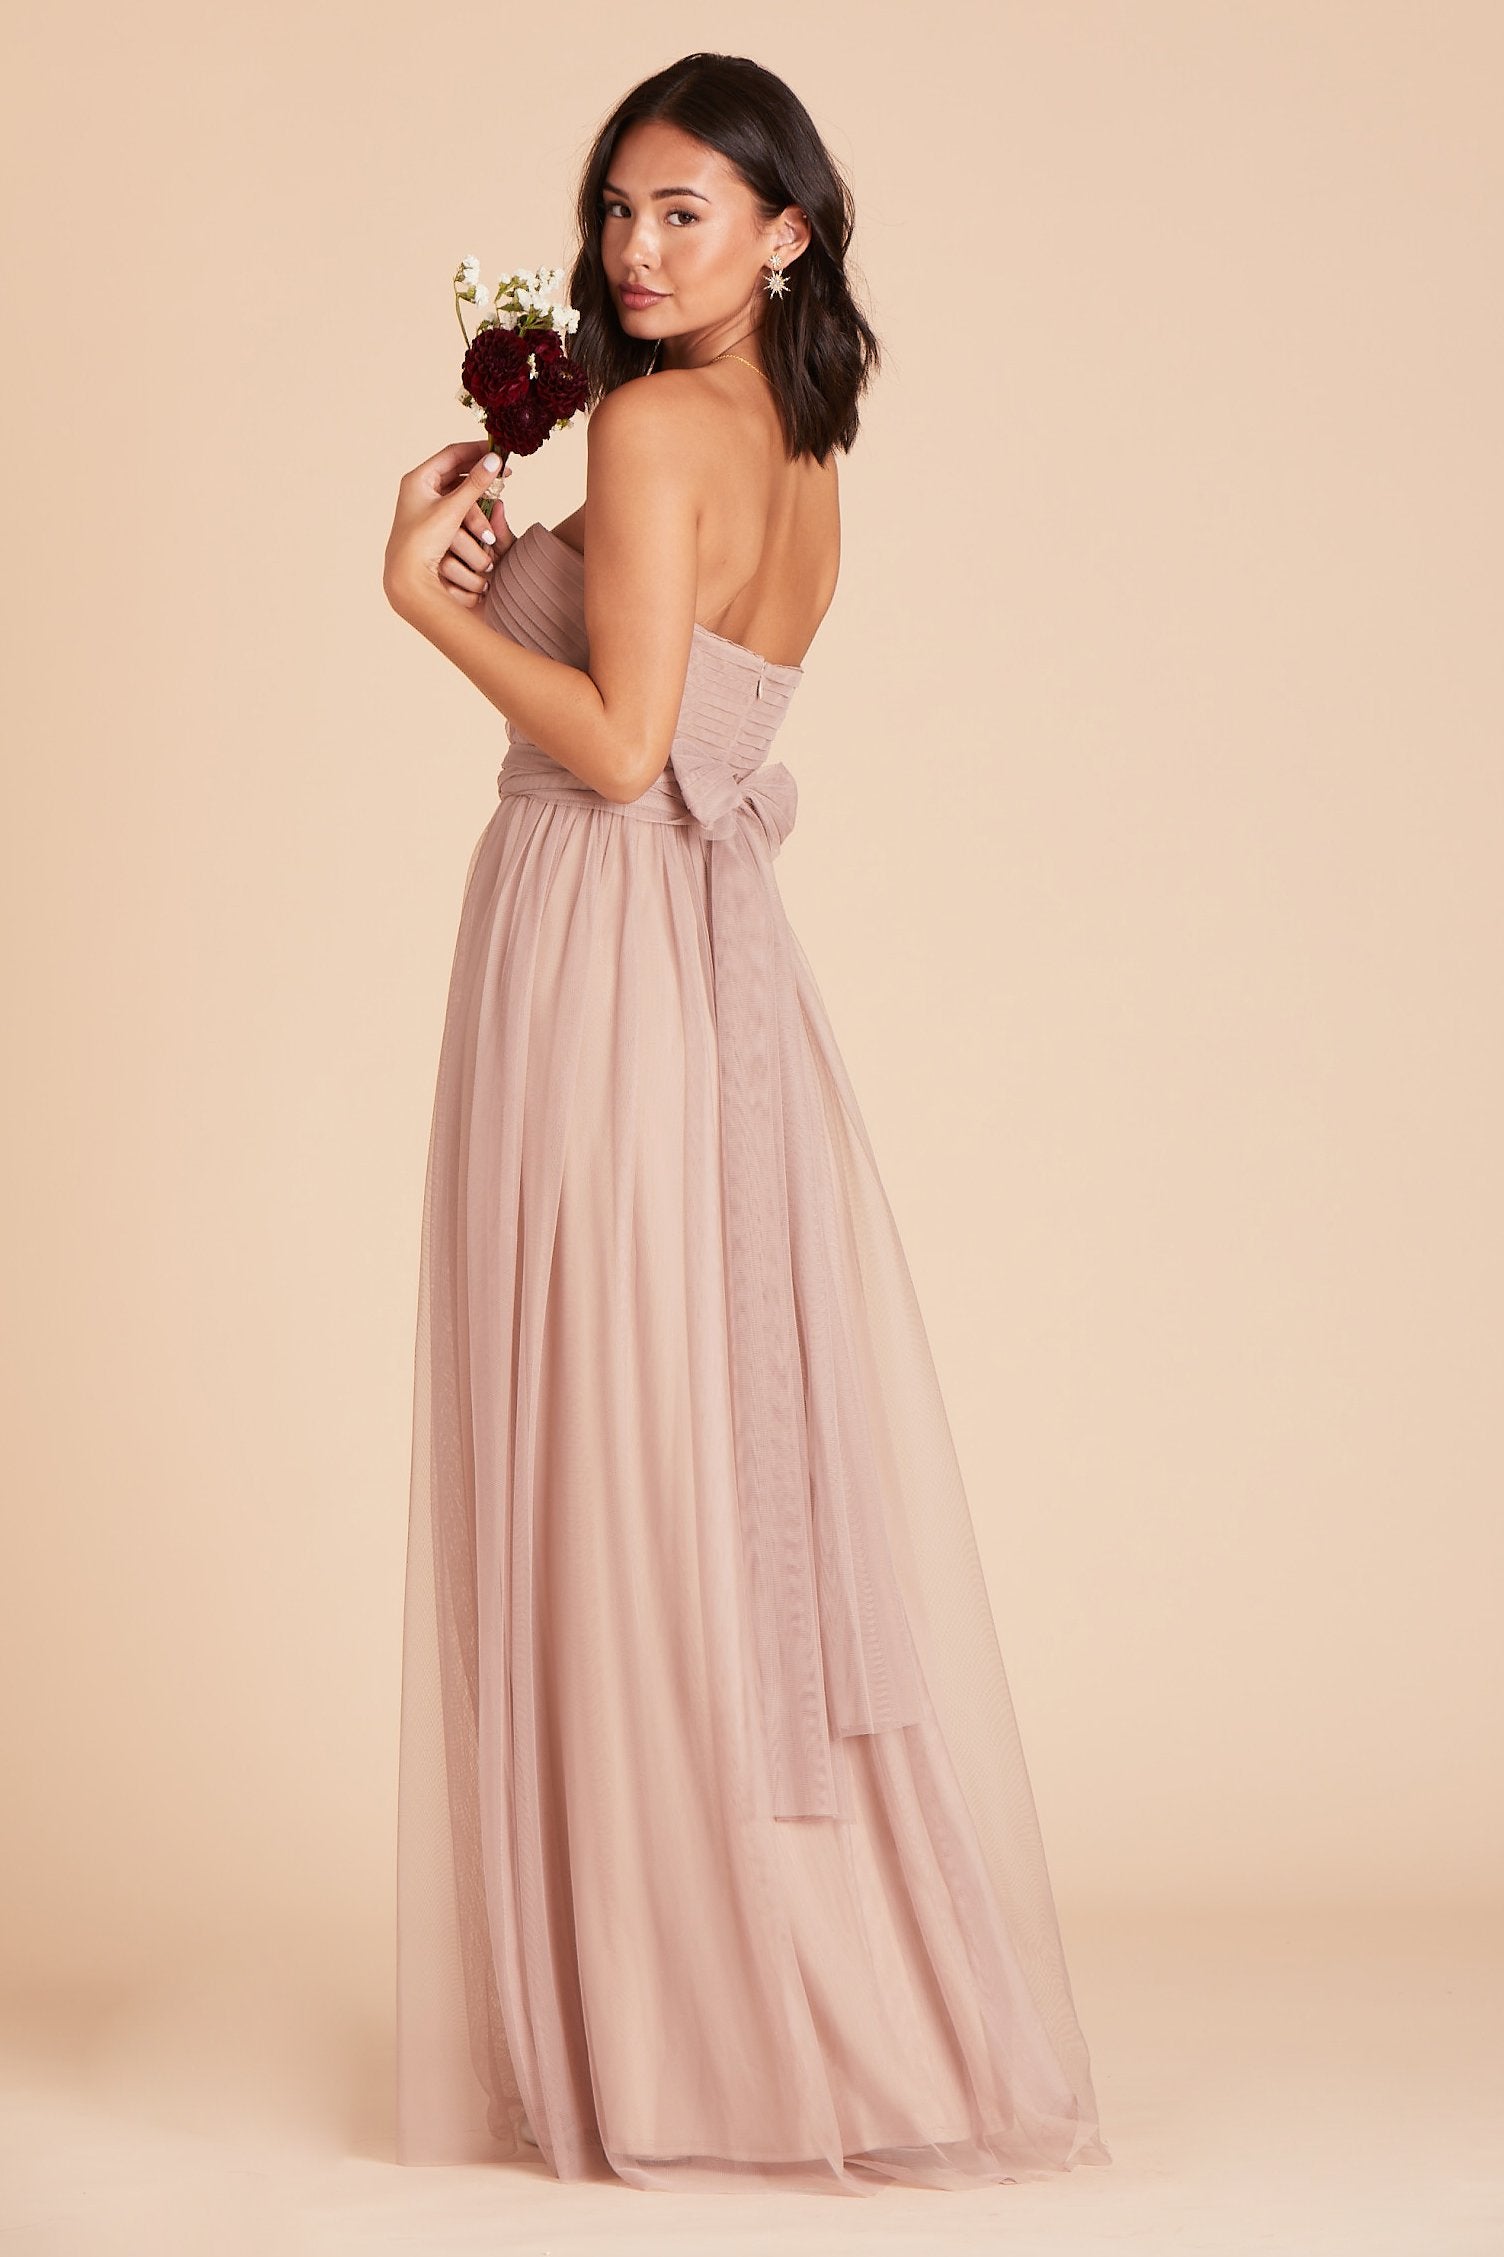 Christina convertible bridesmaid dress in sandy taupe tulle by Birdy Grey, side view